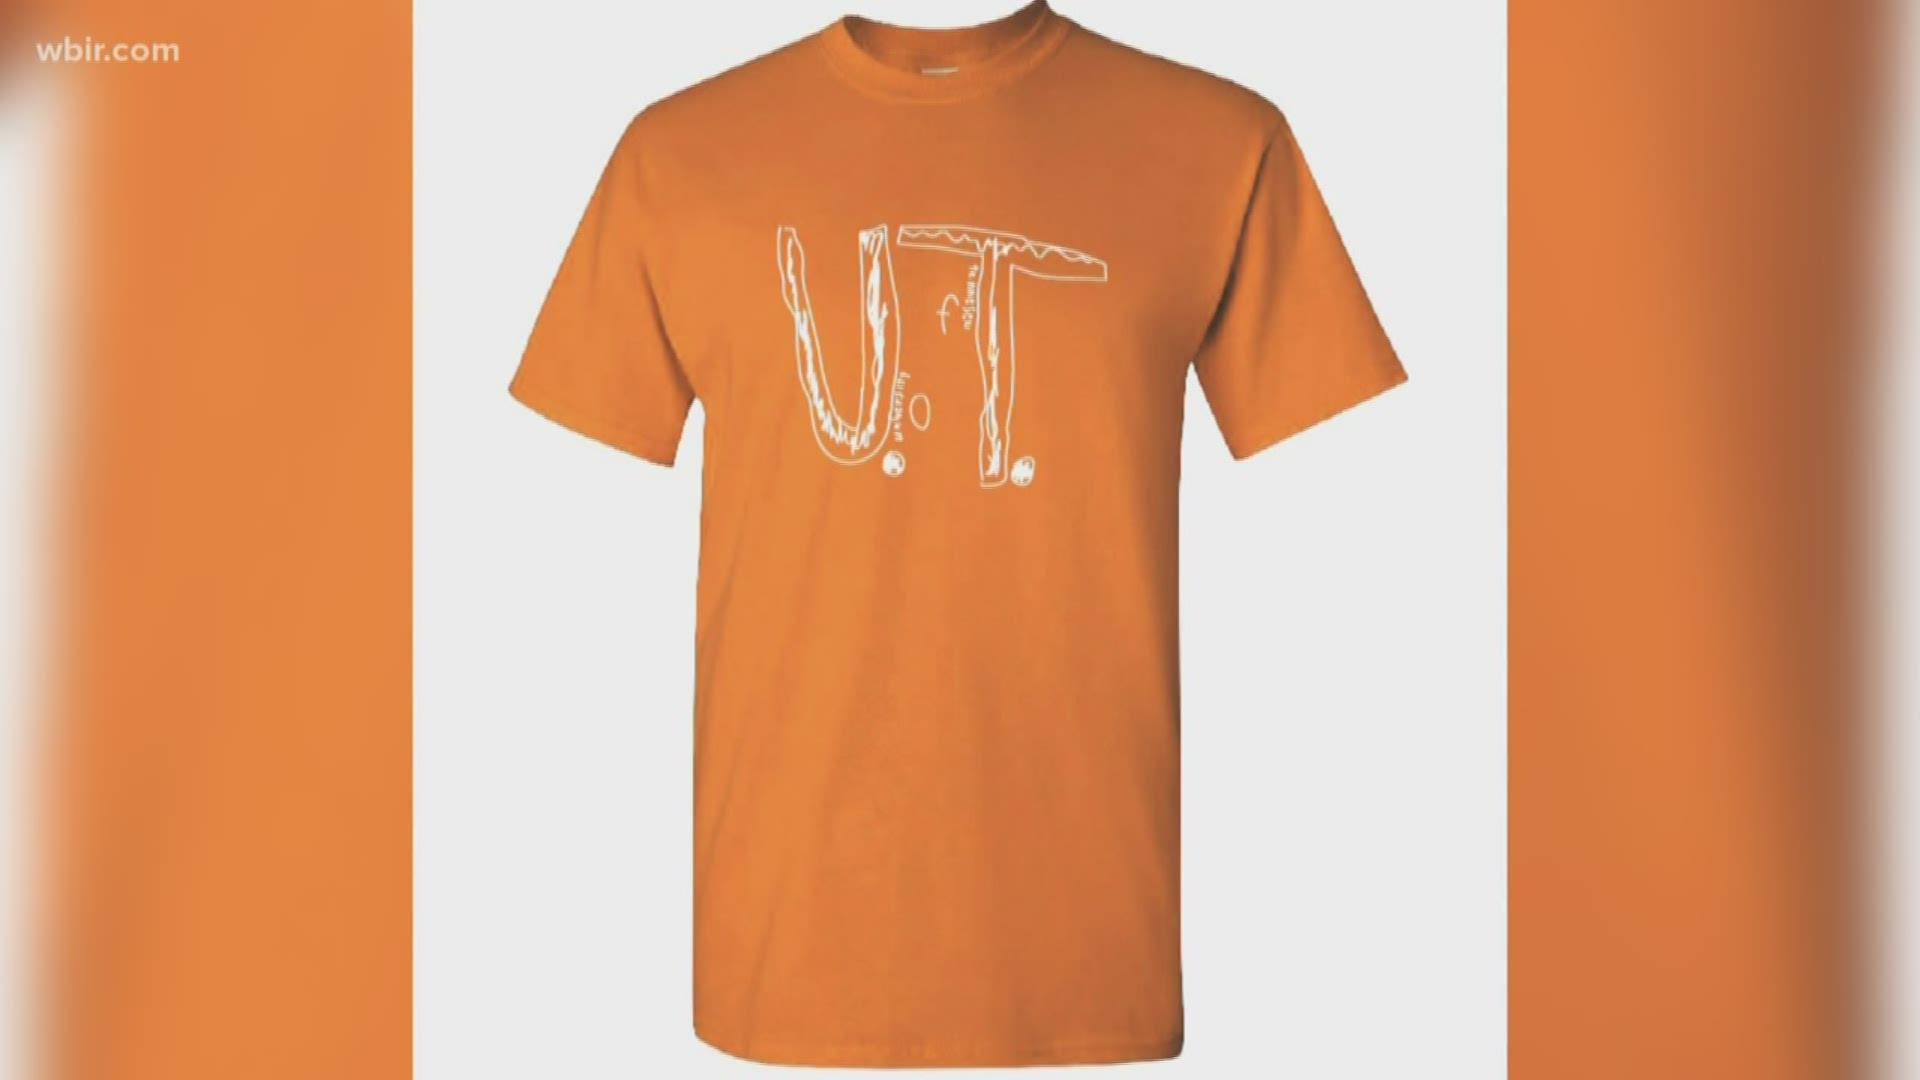 So many people want the UT t-shirt inspired by a young Vol fan's homemade version that it's crashed the Vol Shop's servers. Many have asked where the money was going, and the Vol Shop said the boy's mother wanted 100% of the proceeds to go to Stomp out Bullying.